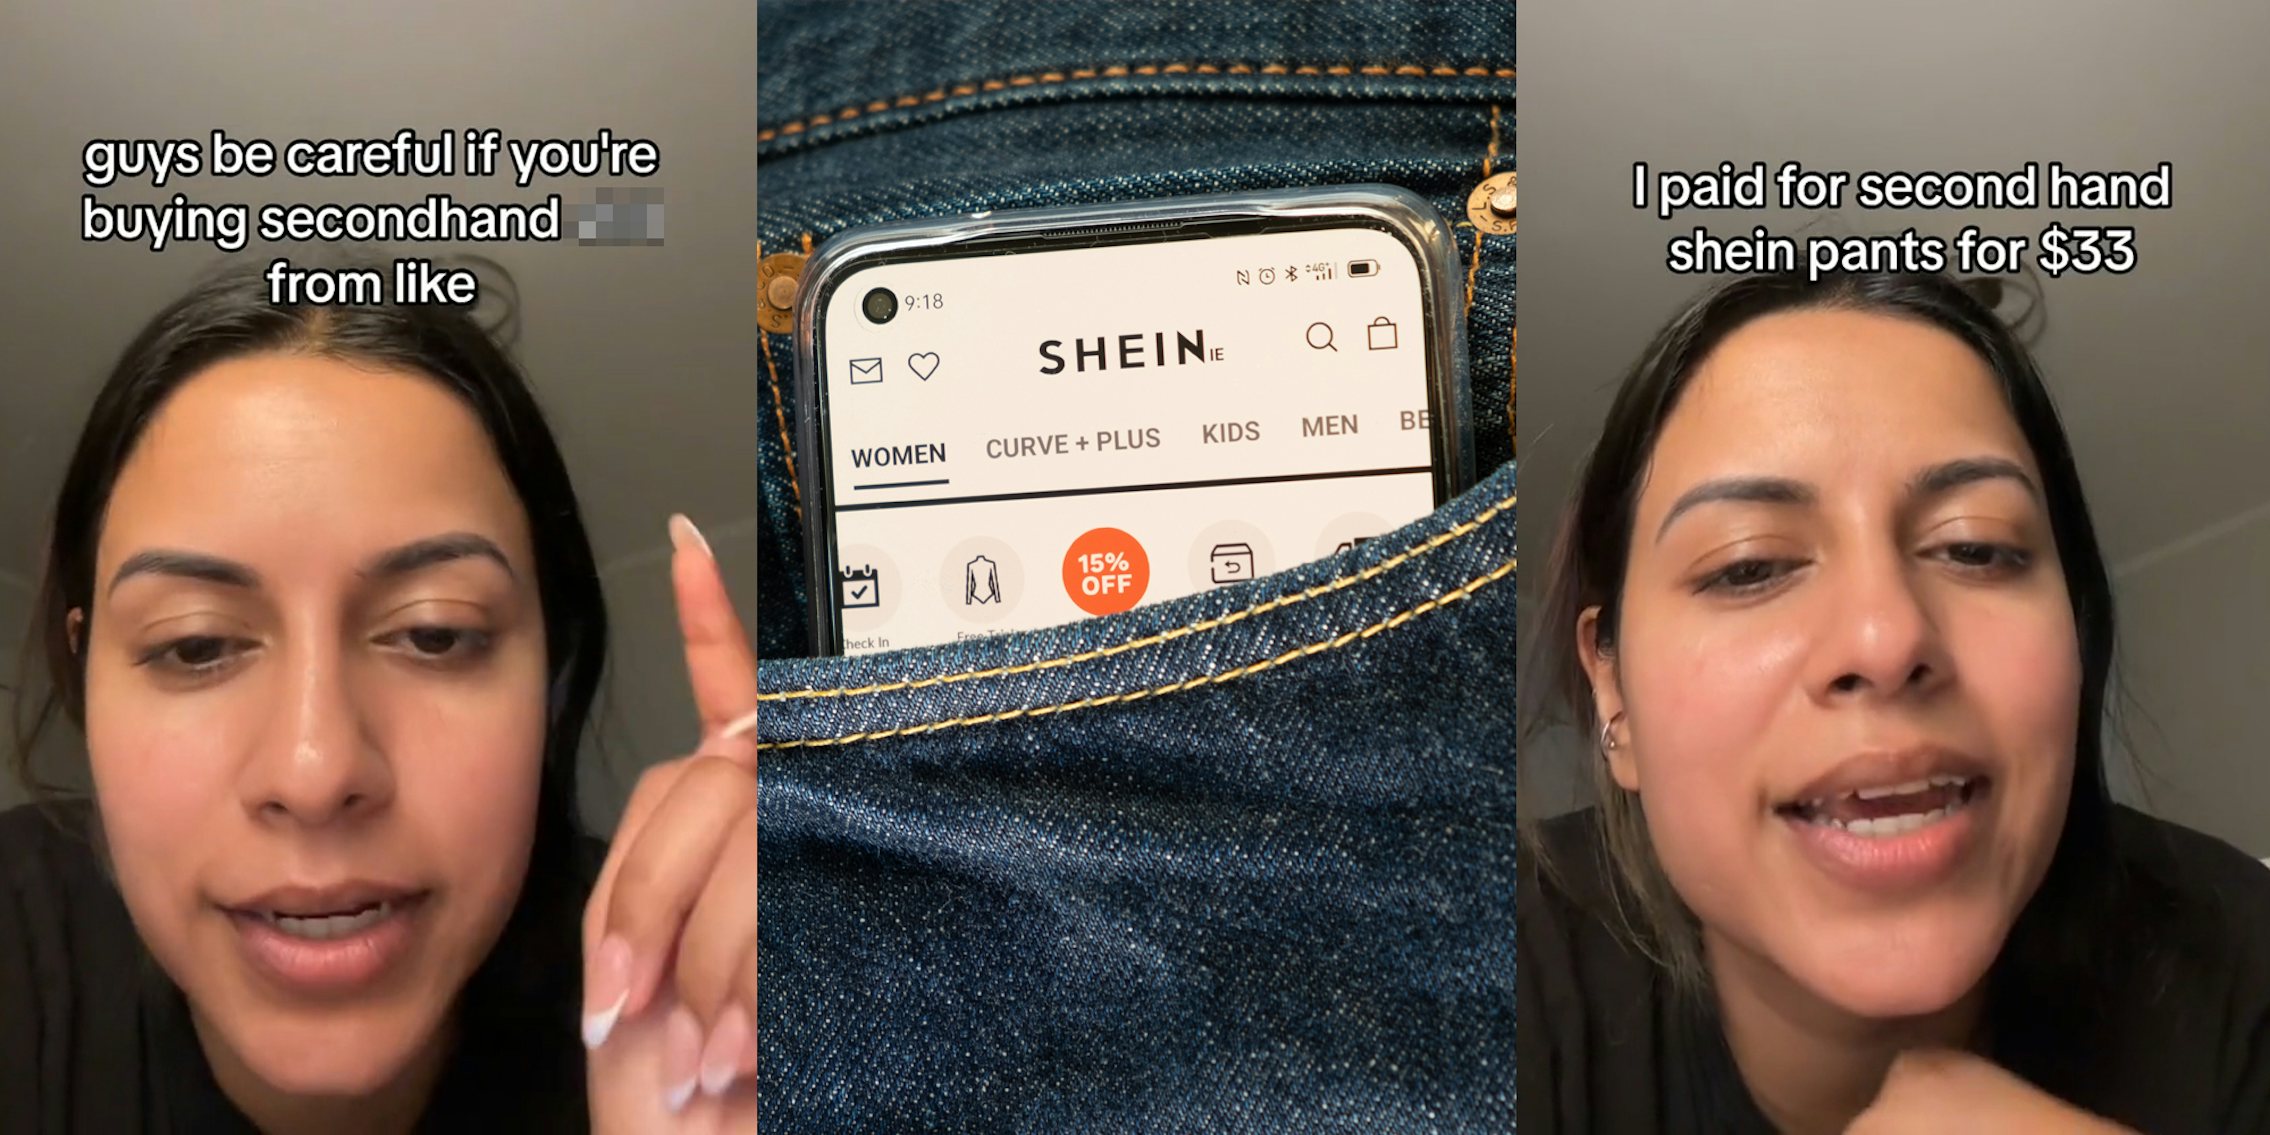 shopper speaking with caption 'guys be careful if you're buying secondhand blank from like' (l) Shein app open on phone in jean pocket (c) shopper speaking with caption 'I paid for second hand shein pants for $33' (r)